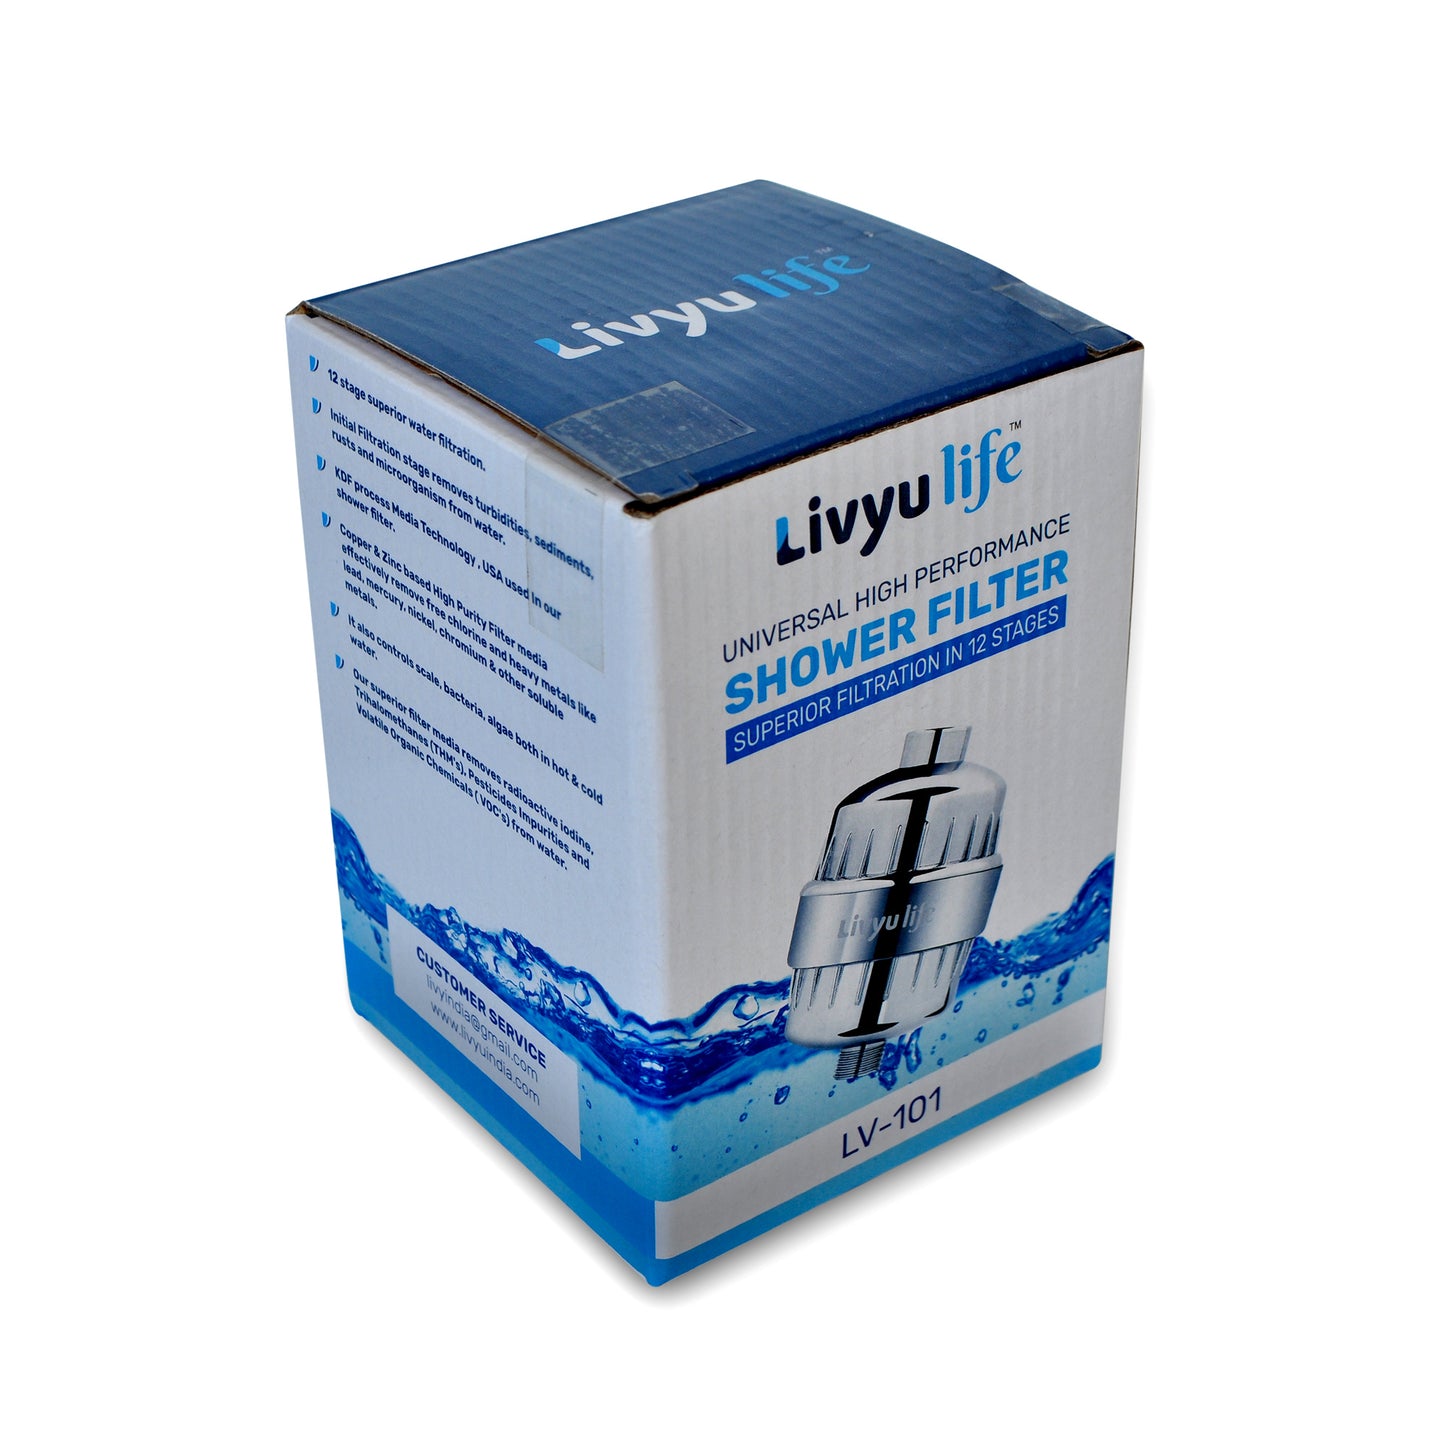 LIVYU LIFE Shower & Tap Filter in 12 stage for Municipal water.